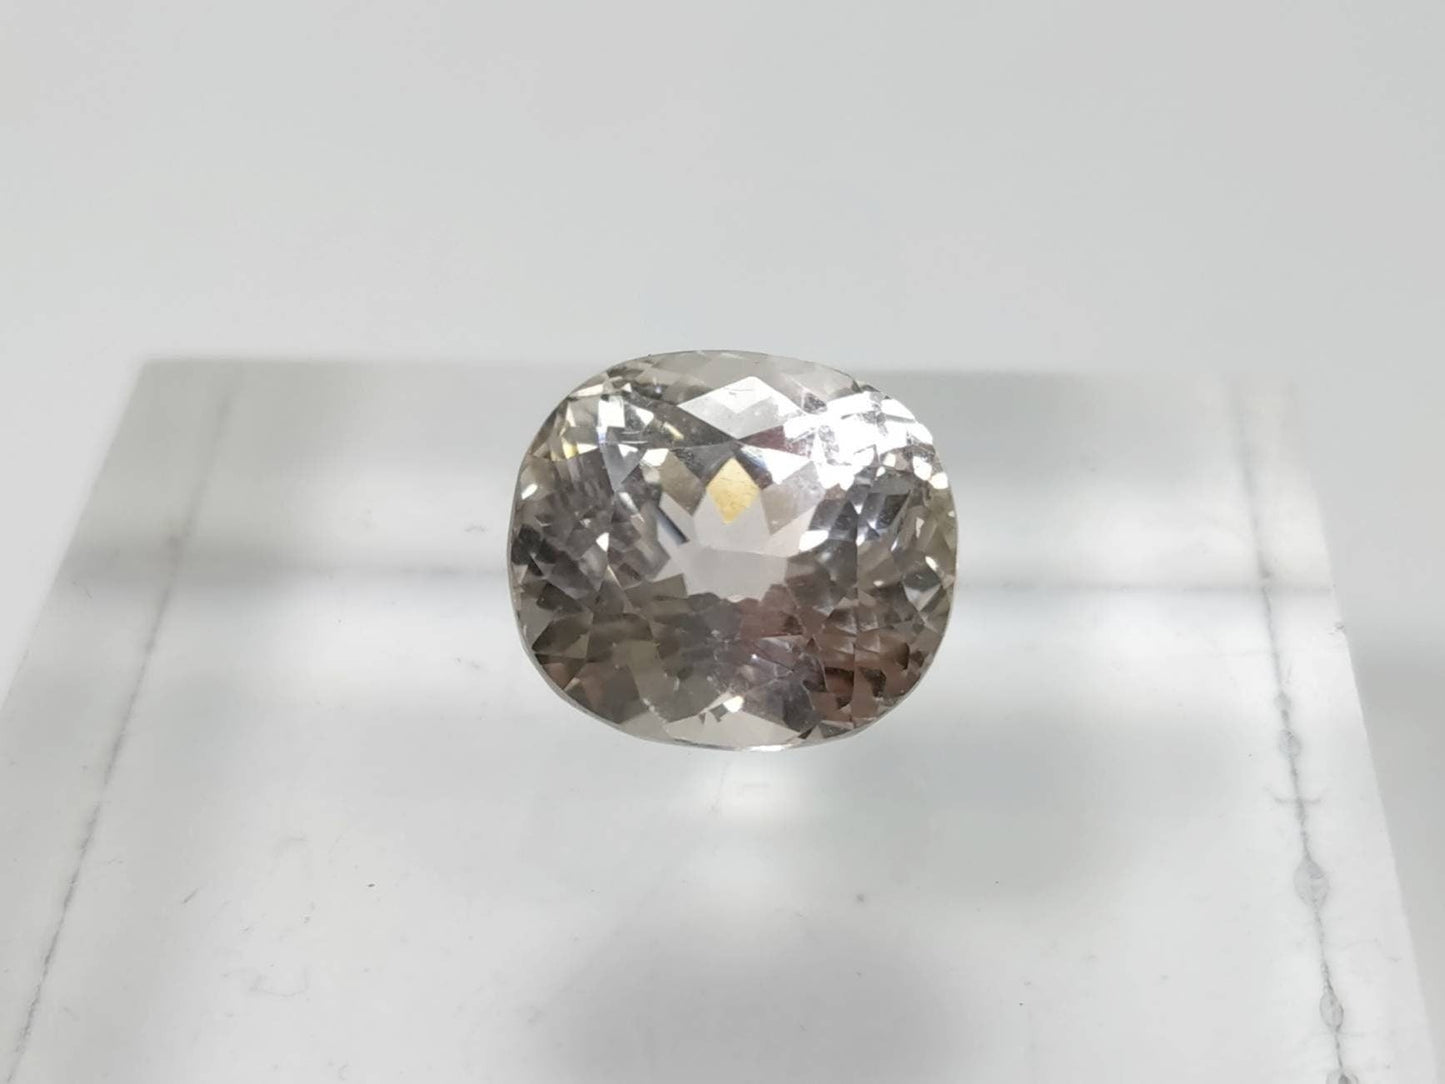 ARSAA GEMS AND MINERALSNatural top quality beautiful 10 carat Faceted Kunzite gem - Premium  from ARSAA GEMS AND MINERALS - Just $30.00! Shop now at ARSAA GEMS AND MINERALS